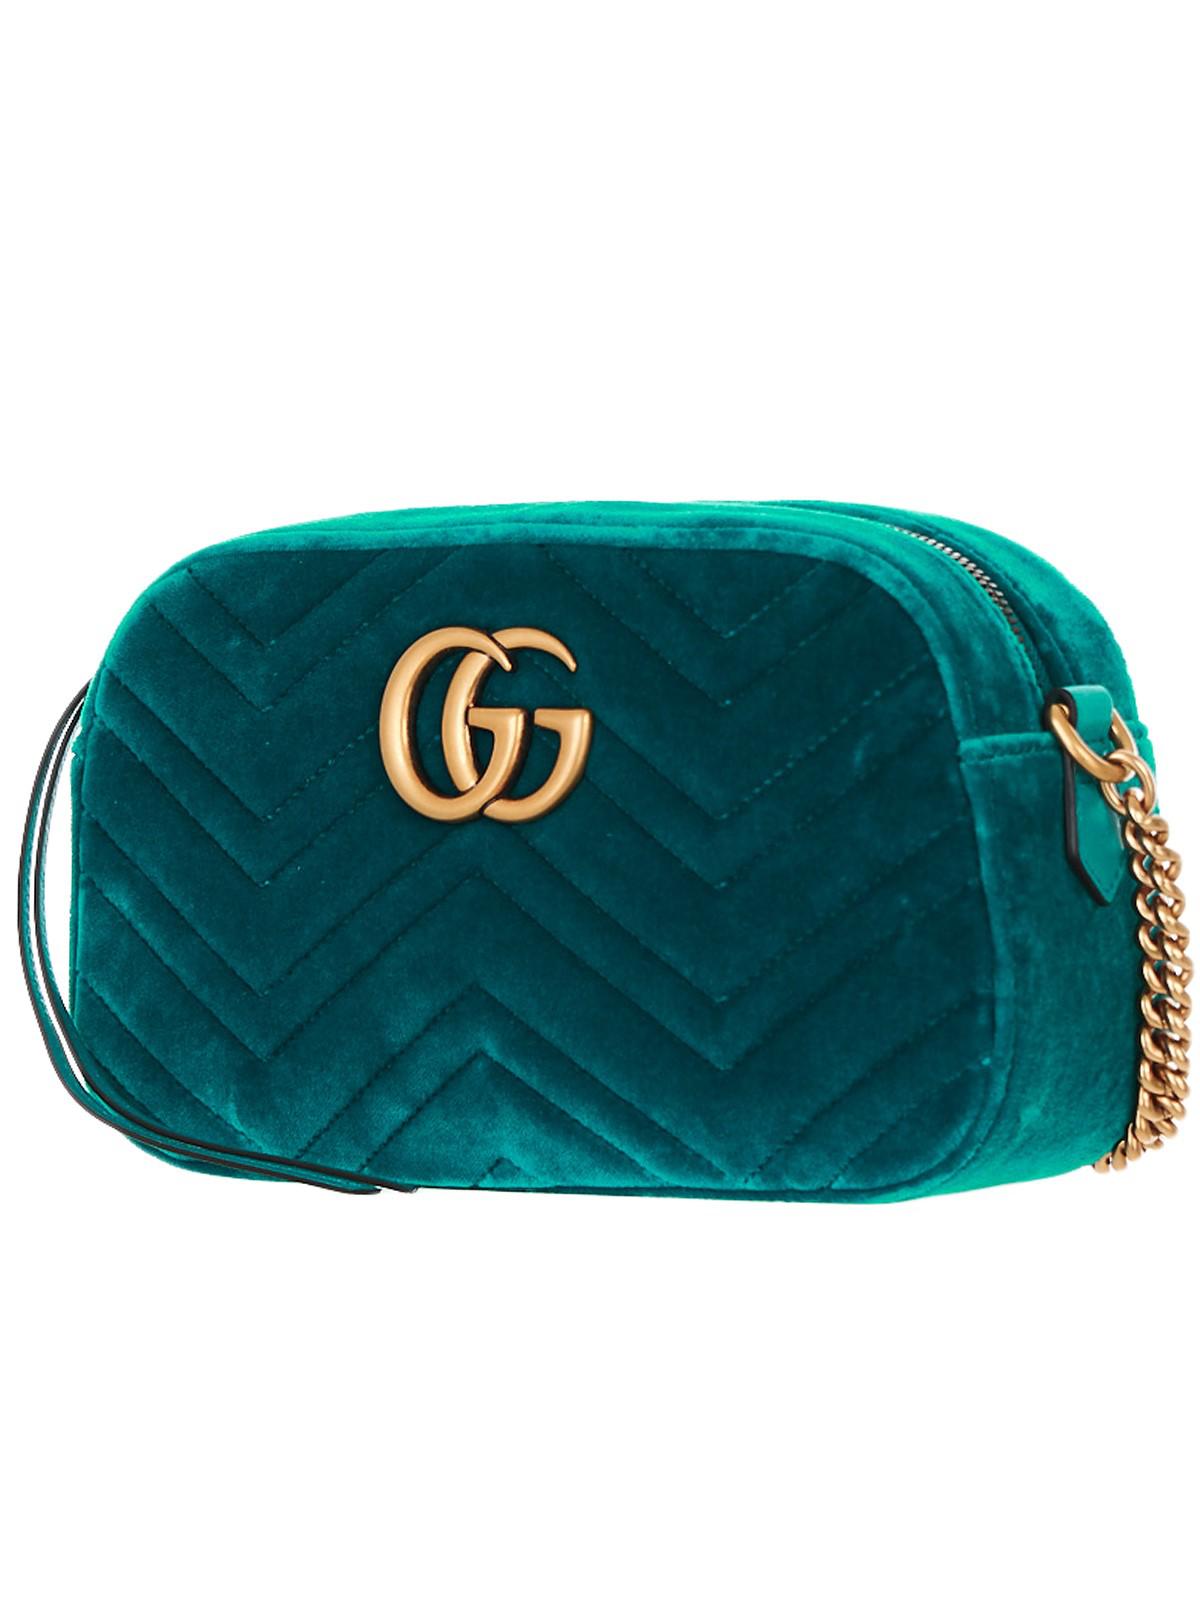 Gucci Turquoise Green Small Velvet GG Marmont Bag | Lyst